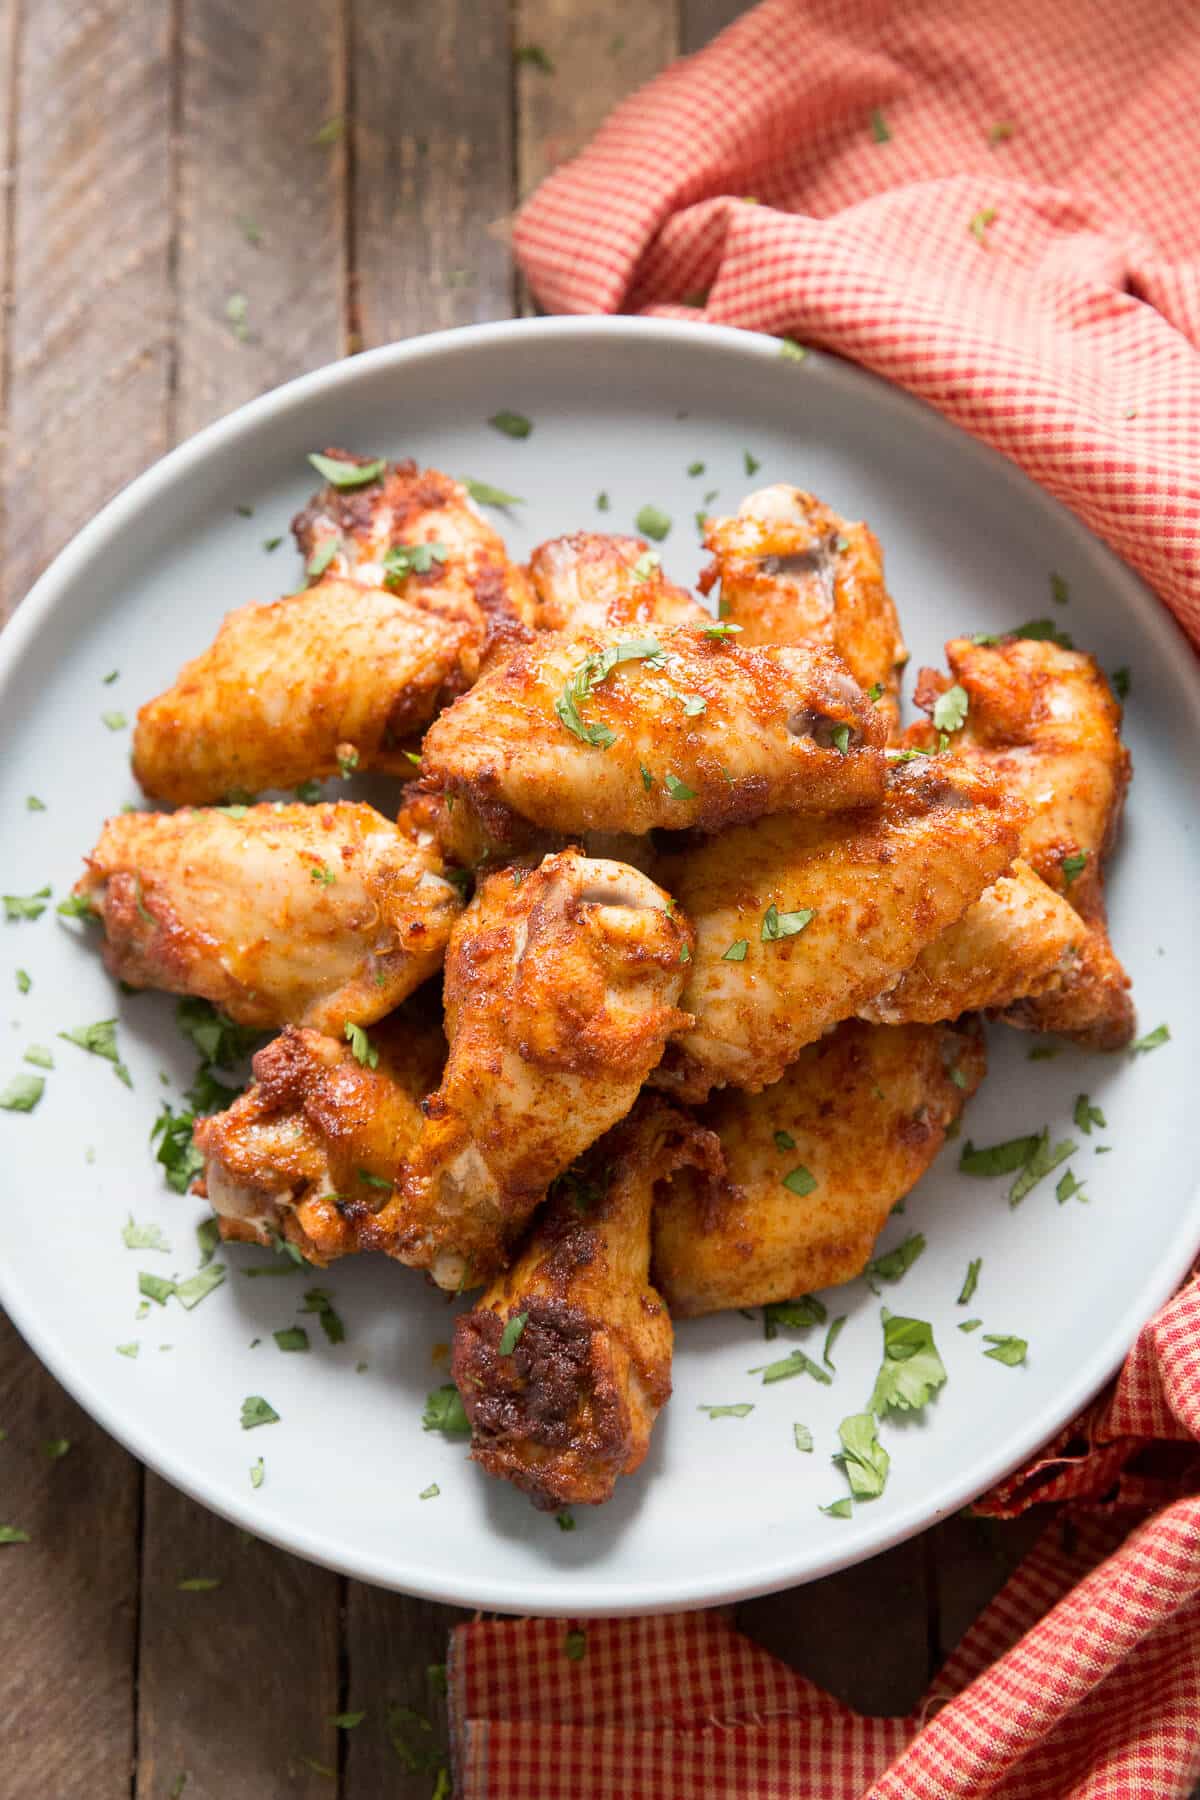 Dry Rub Chicken wings are easy, baked but loaded with spice!